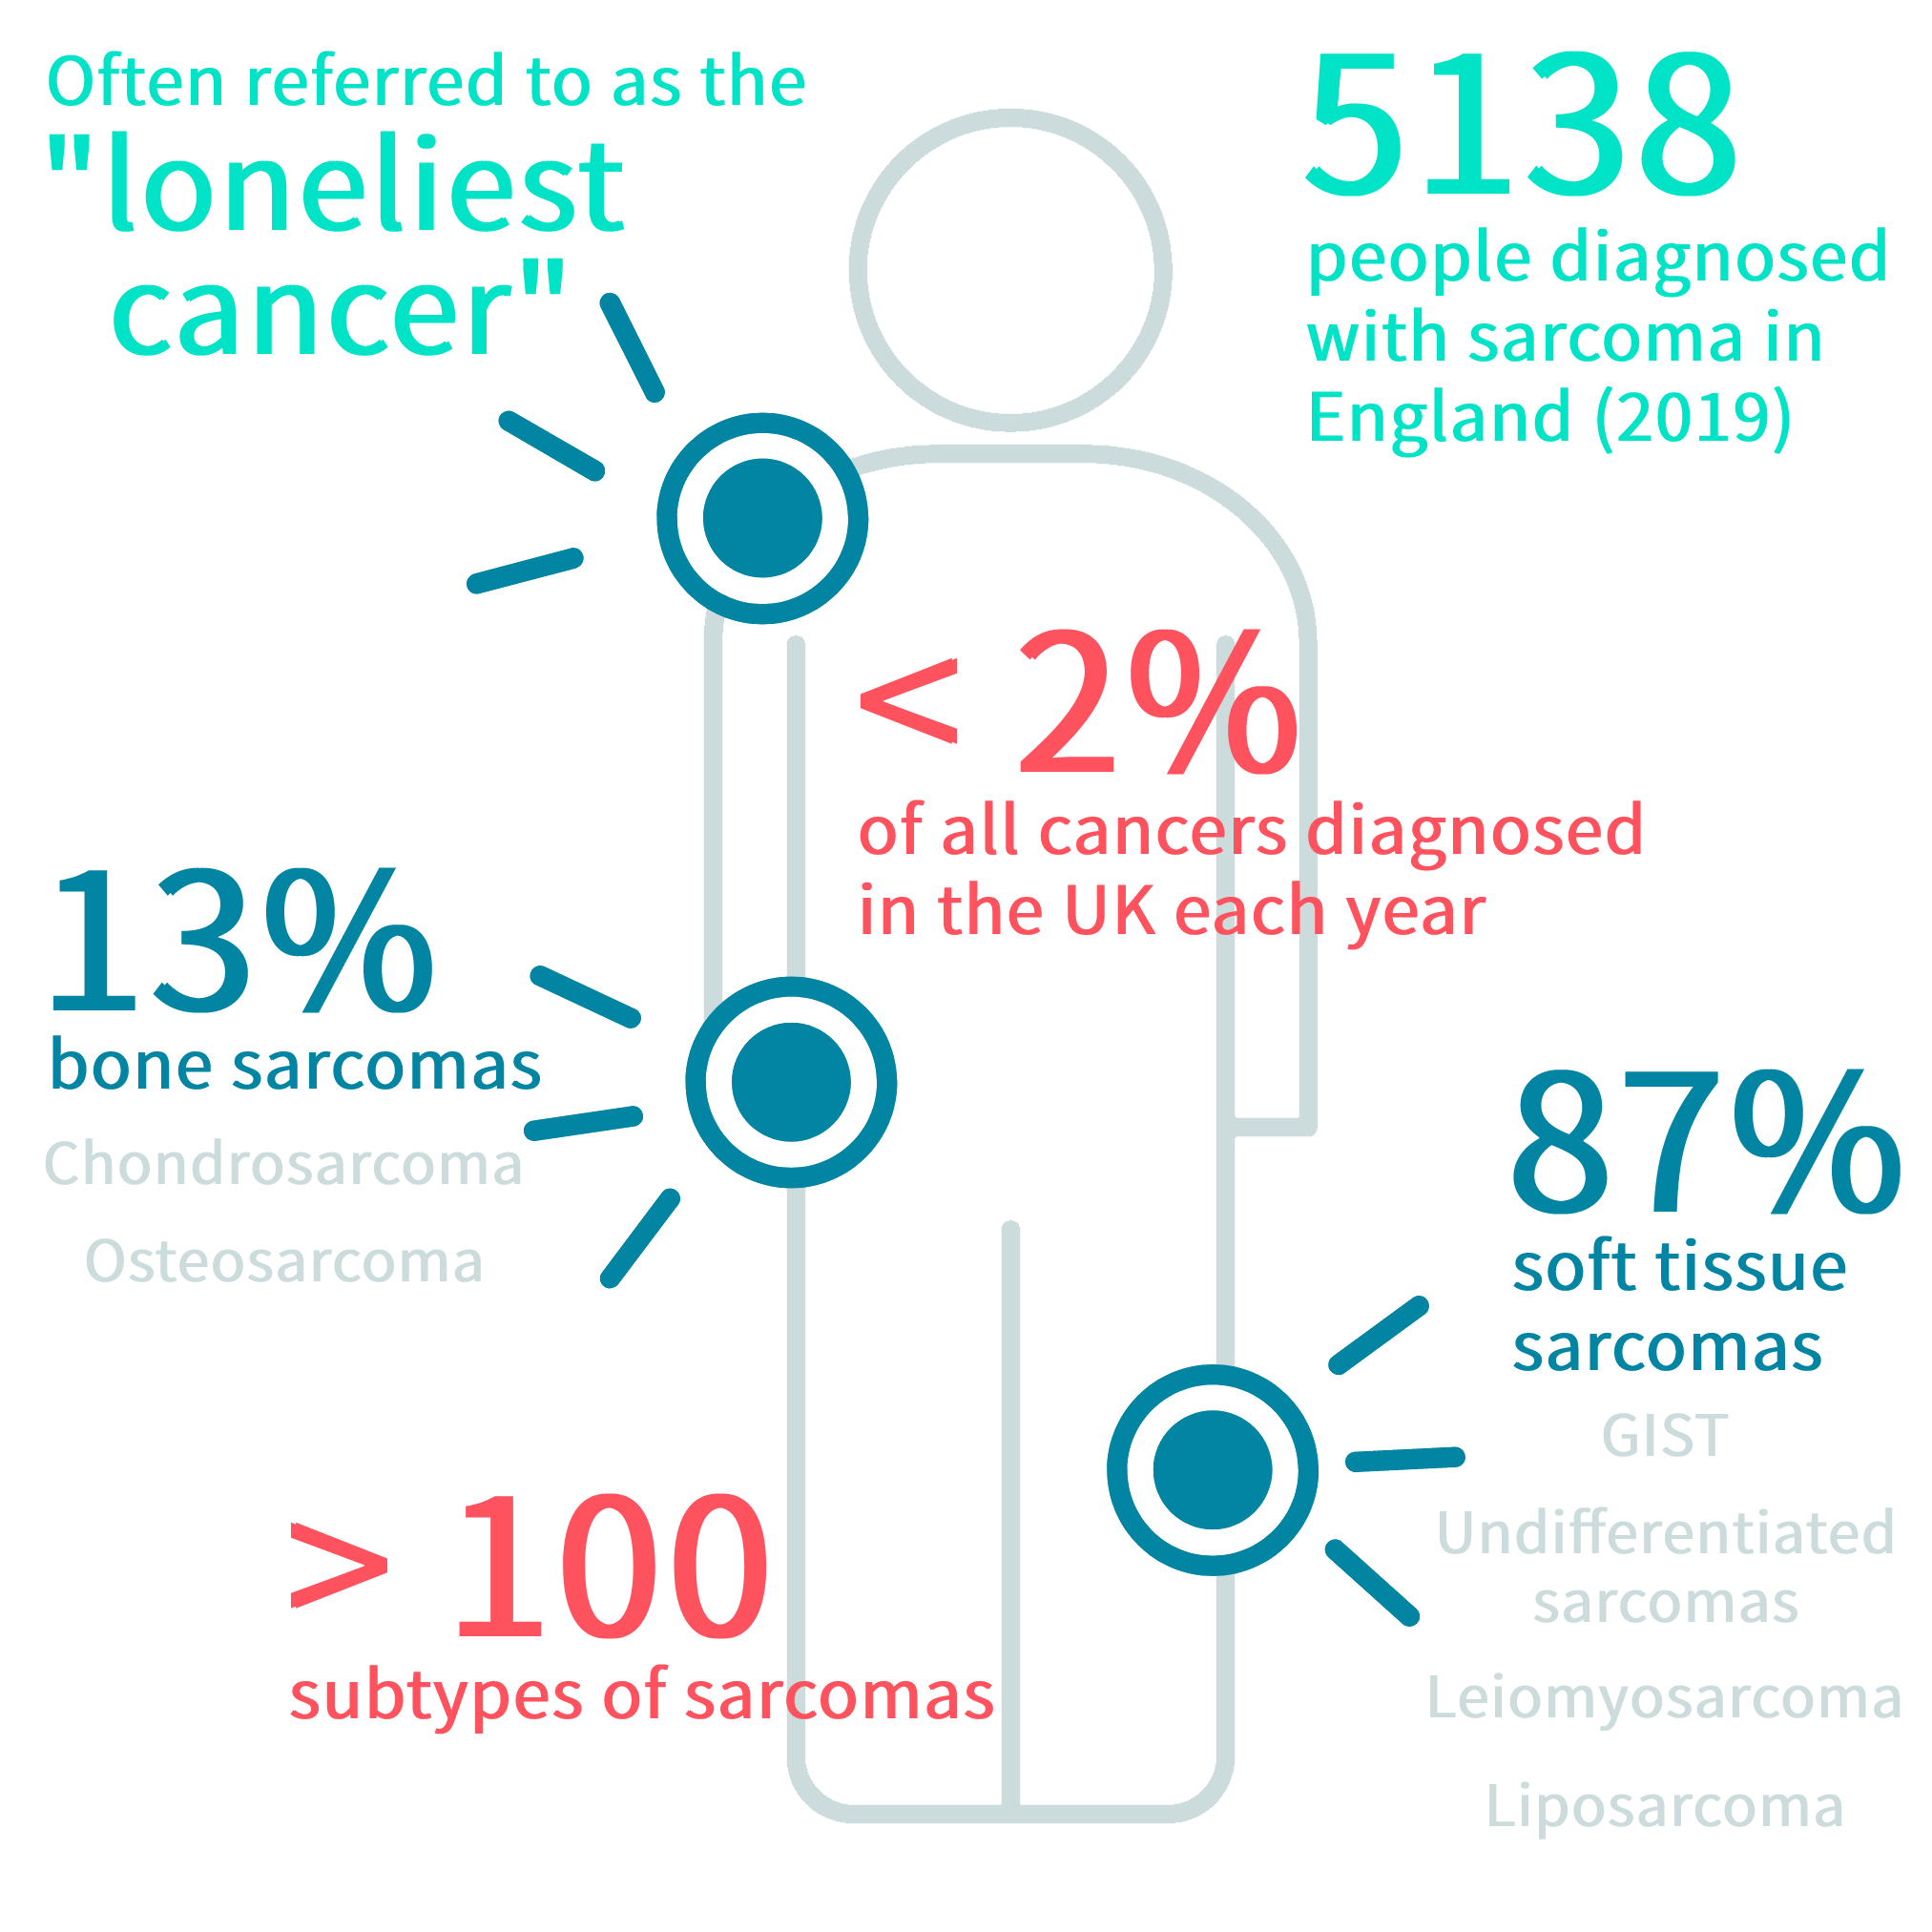 Infographic showing statistics related to sarcoma cancer